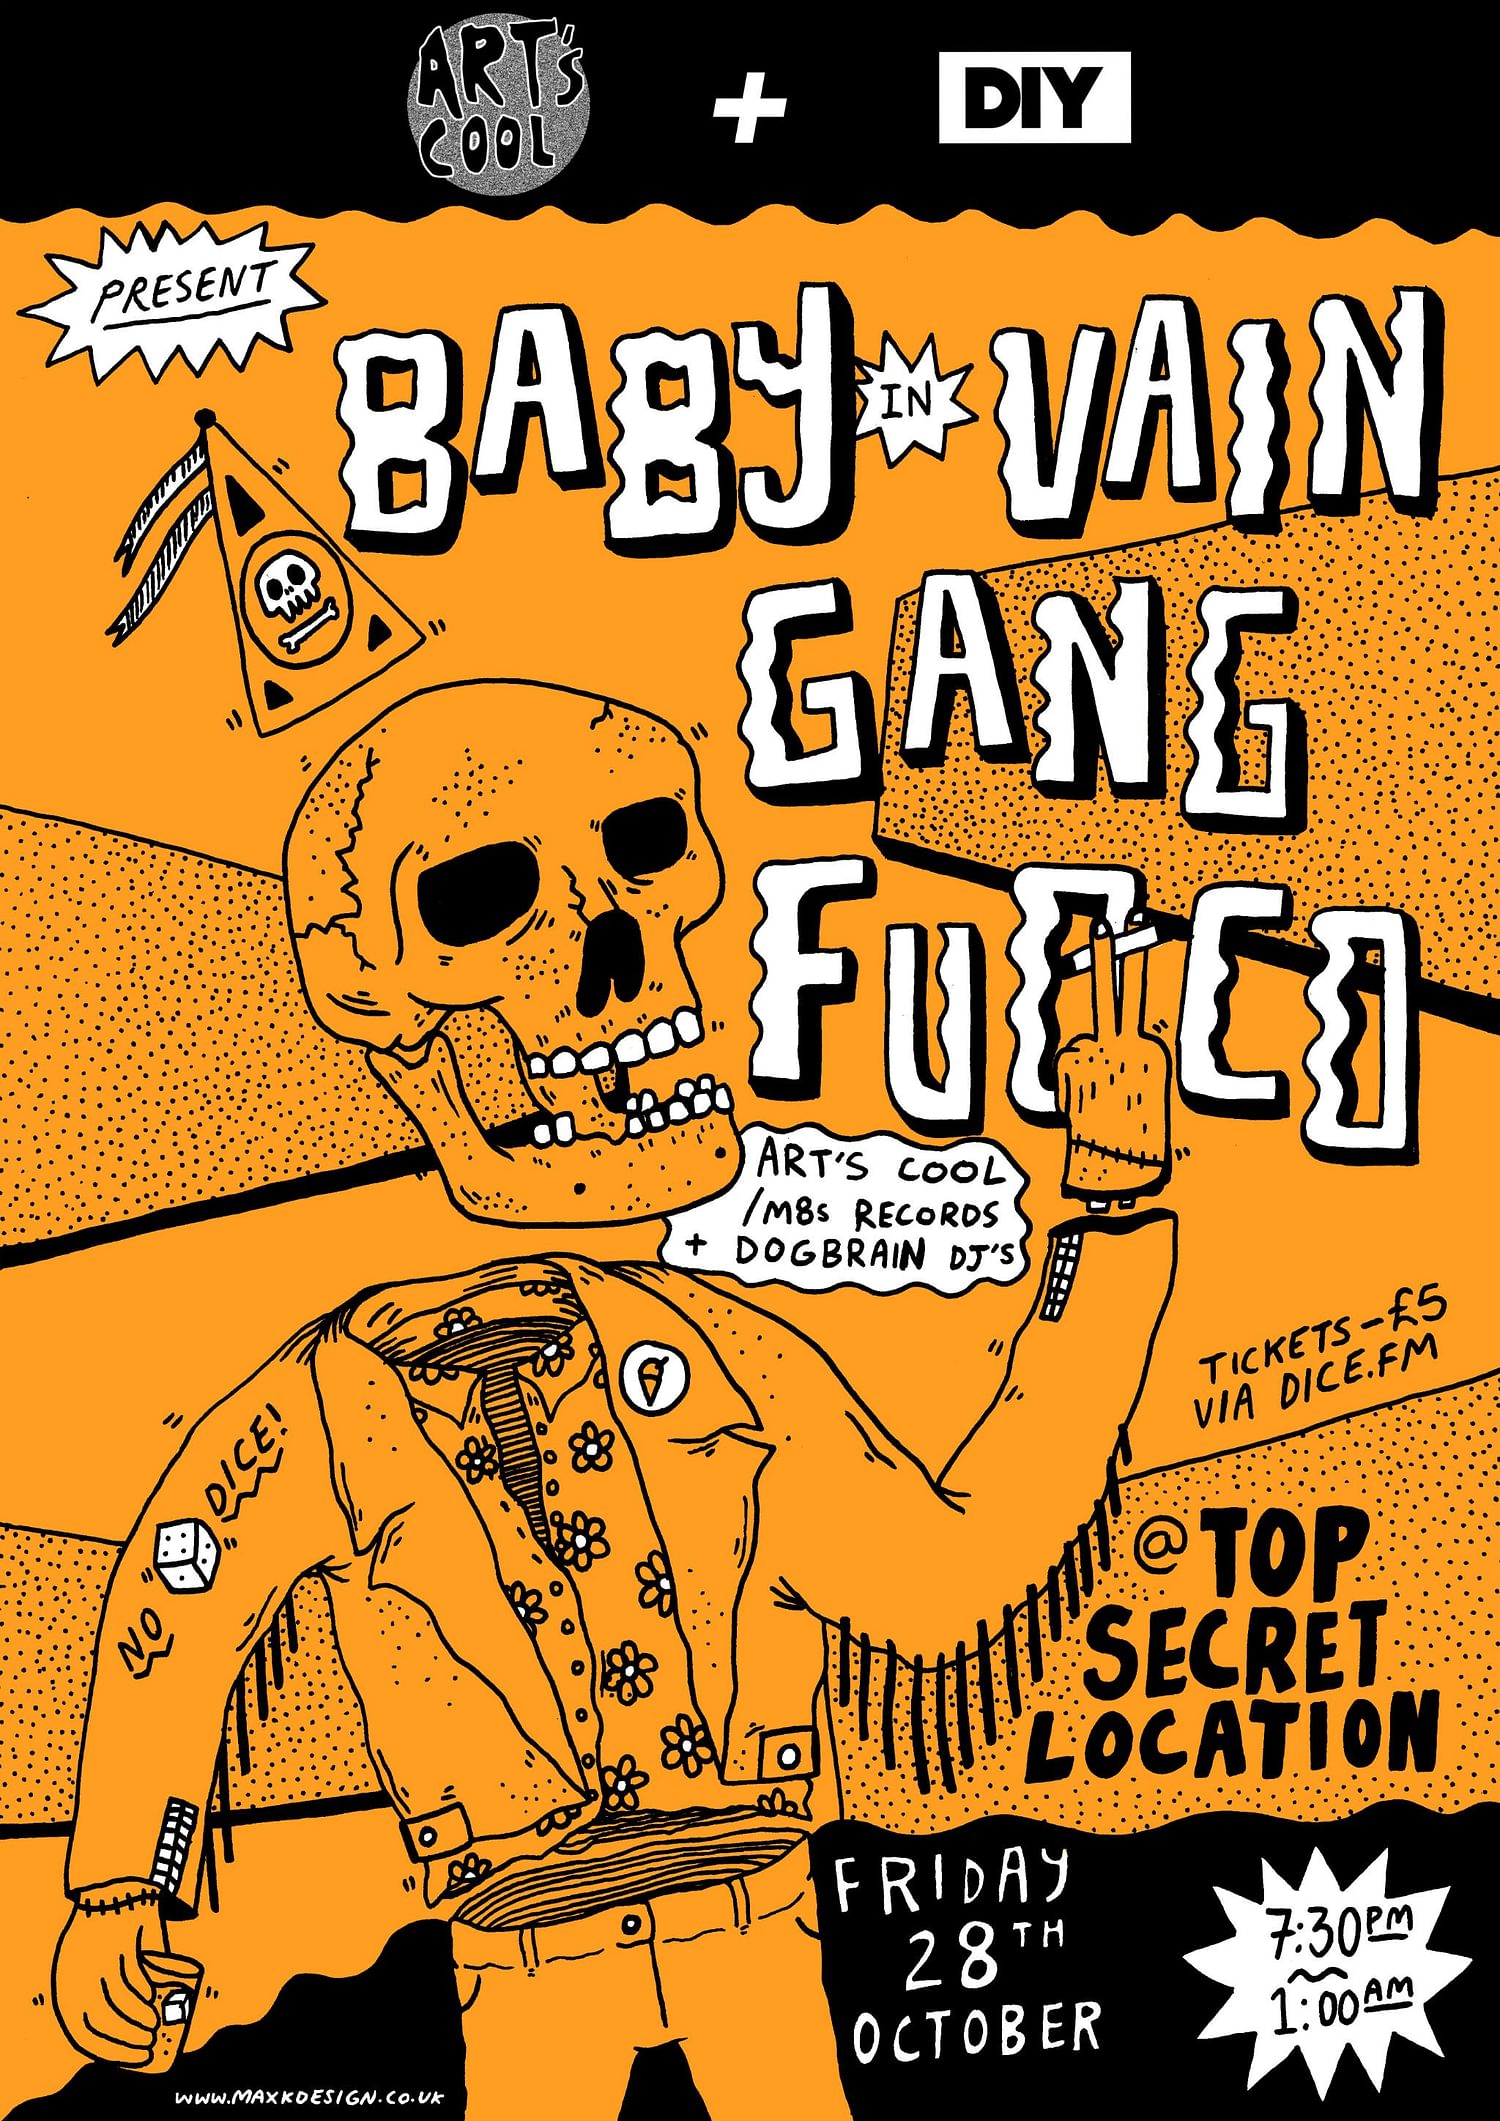 Baby in Vain, Gang and Fuoco to play Art’s Cool and DIY Presents Halloween show